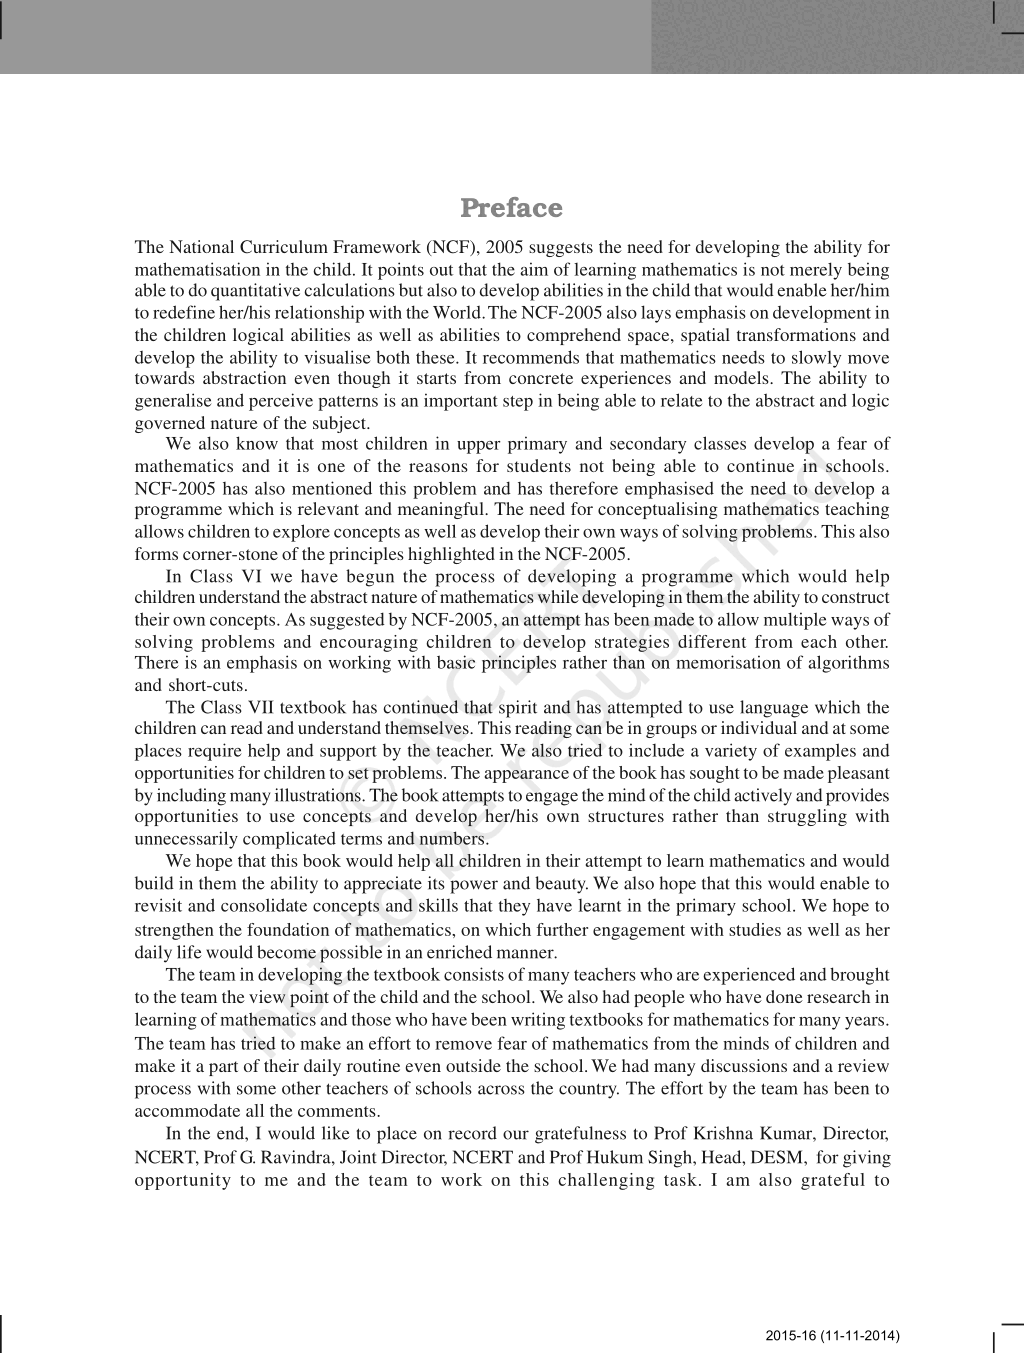 page 5